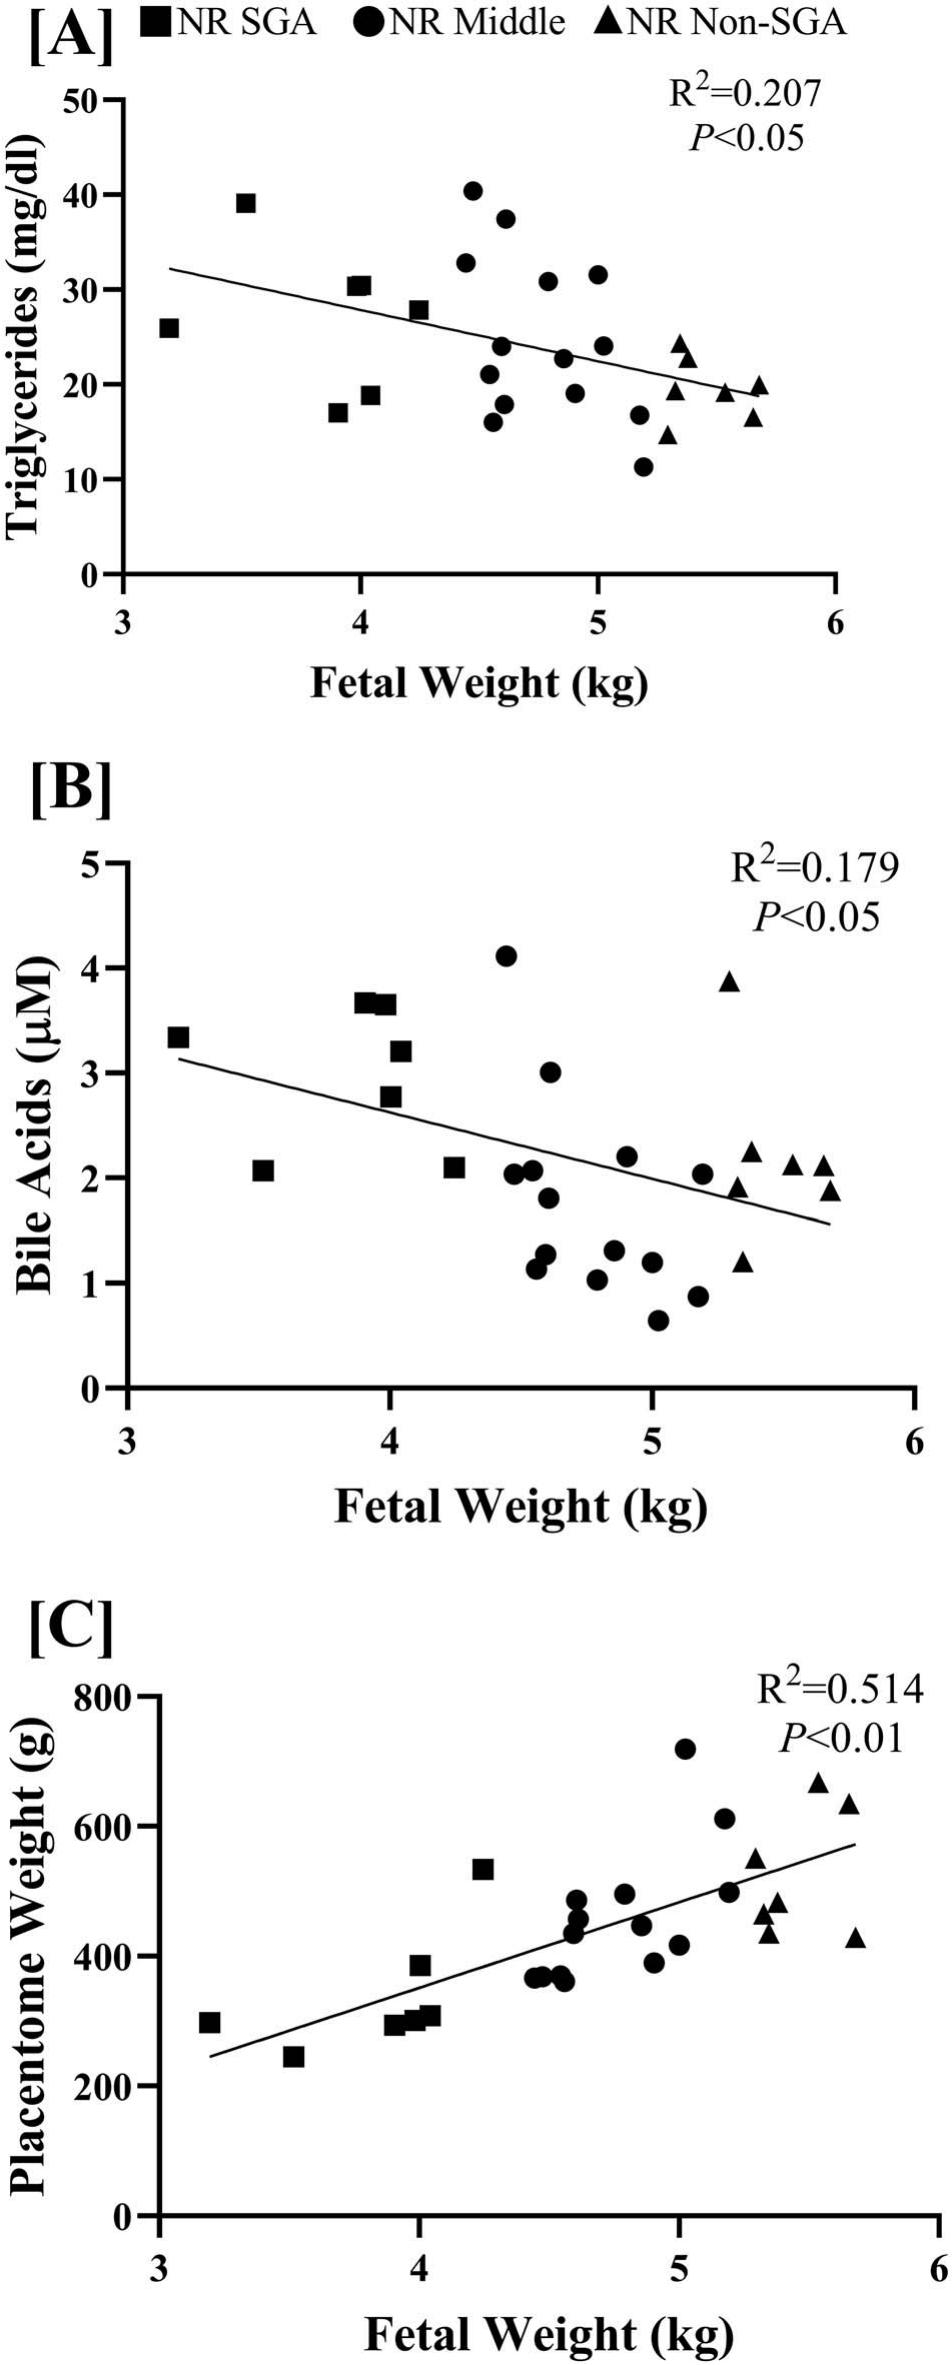 Lipid Metabolism Is Altered In Maternal Placental And Fetal Tissues Of Ewes With Small For Gestational Age Fetuses